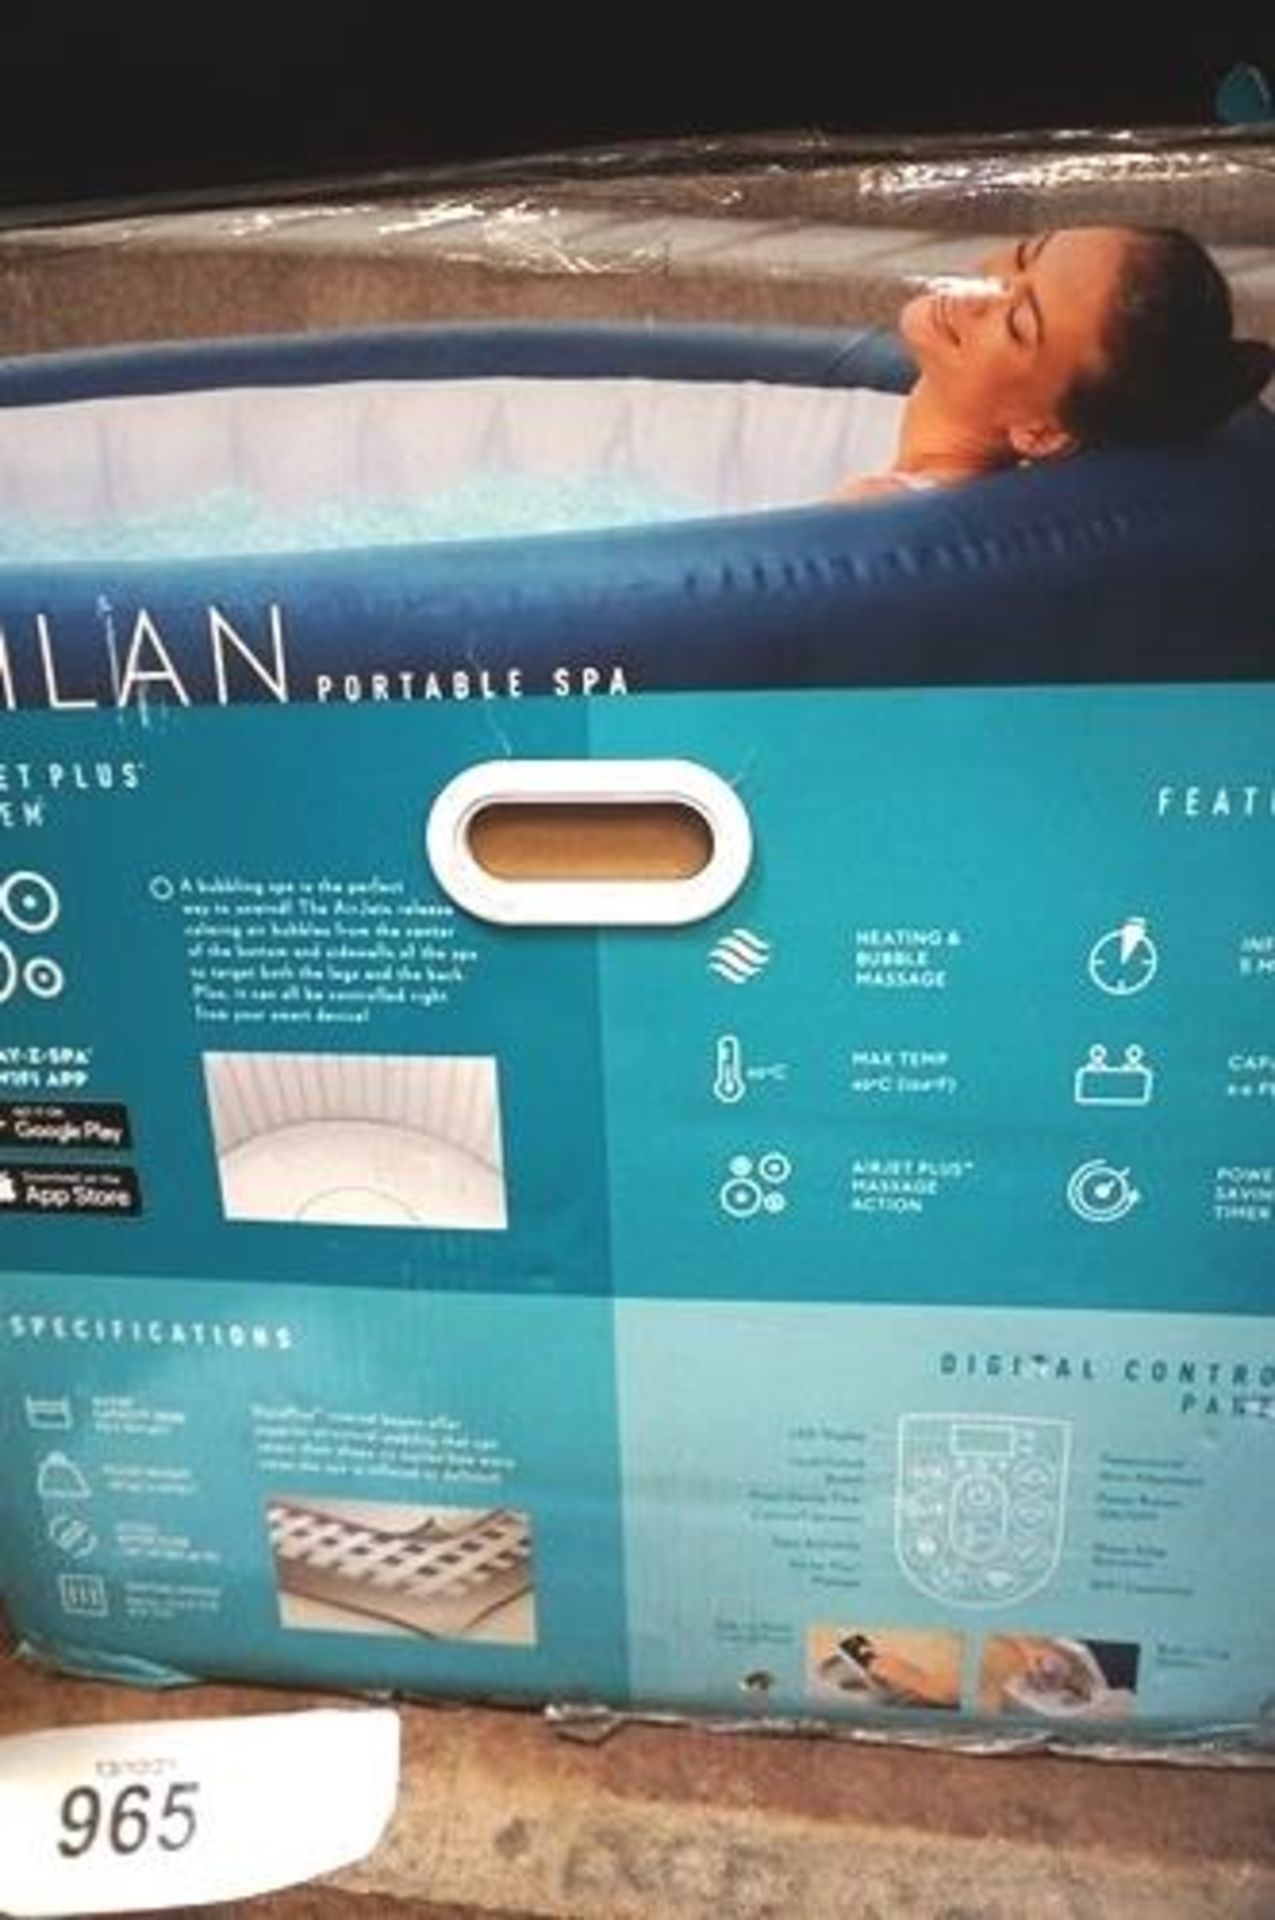 1 x Milan portable Lay-Z-Spa, model 60029, 916ltrs, 4-6 people, 2050W - Sealed new in box (GS15) - Image 2 of 2